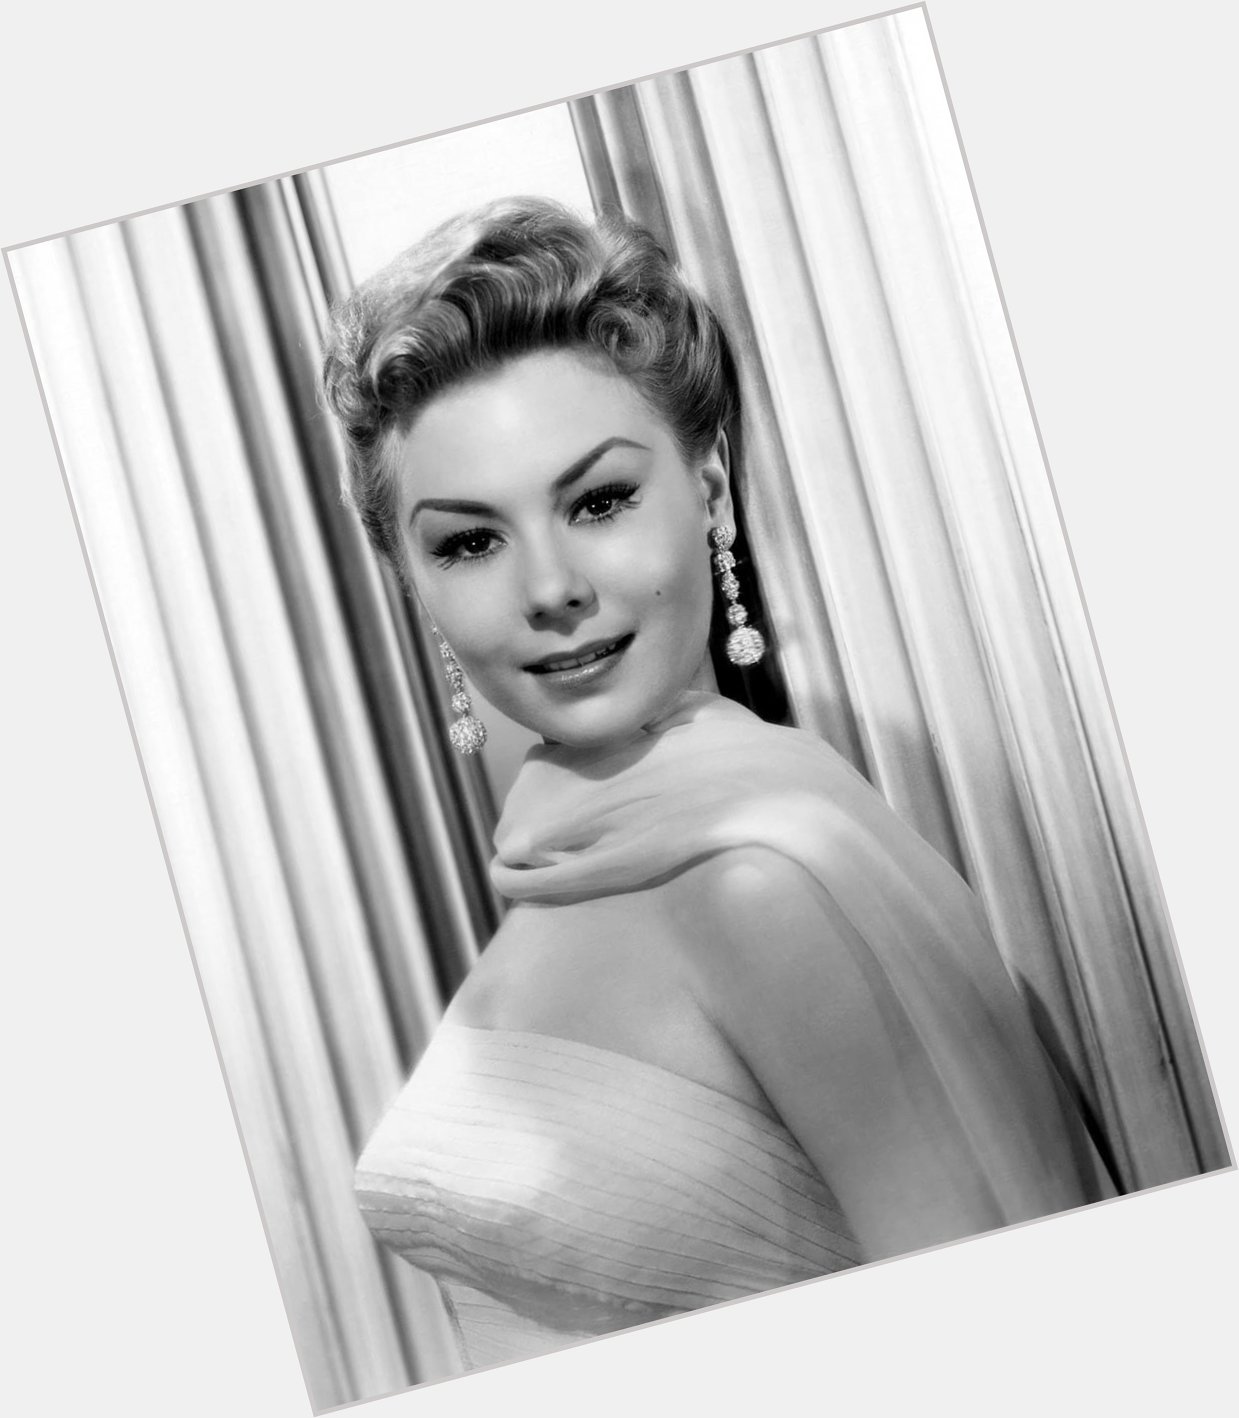 Happy birthday to American actress, singer, and dancer Mitzi Gaynor, born September 4, 1931. 